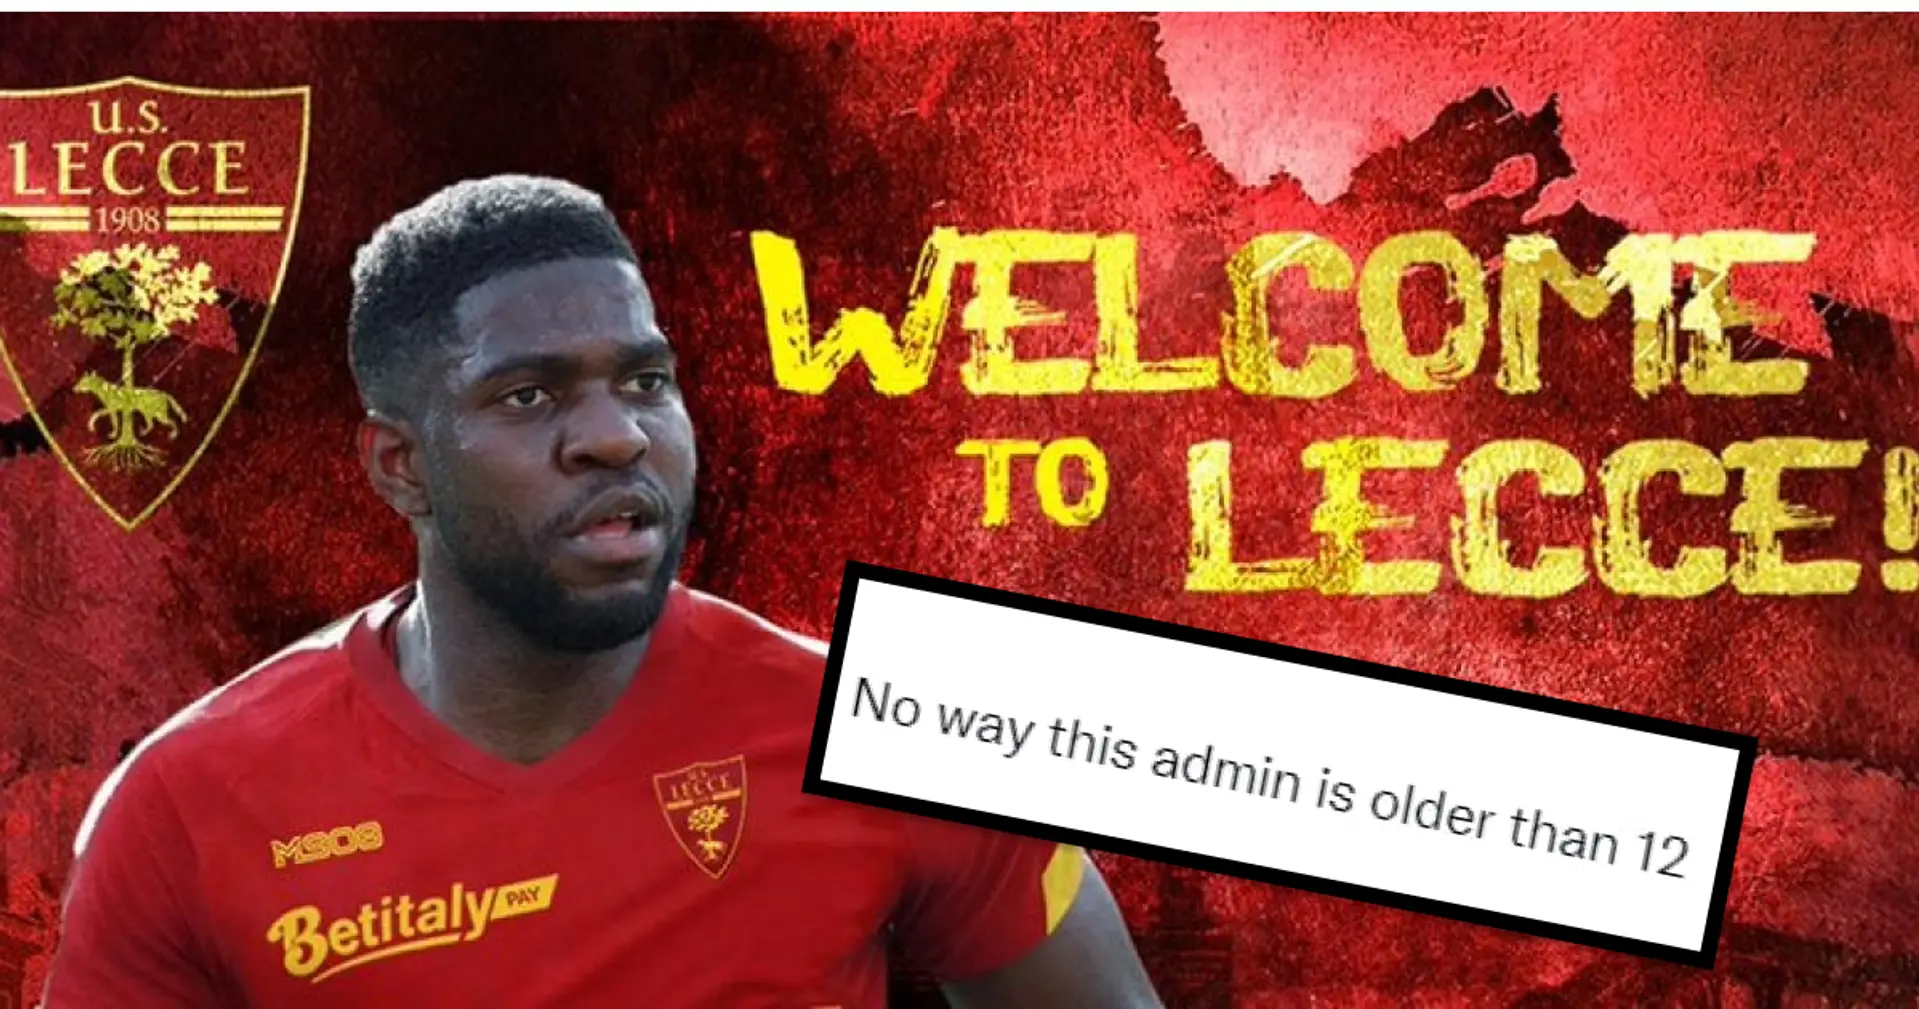 'Lecce announce Umtiti with Microsoft Paint': Fans mock at Umtiti's announcement post 